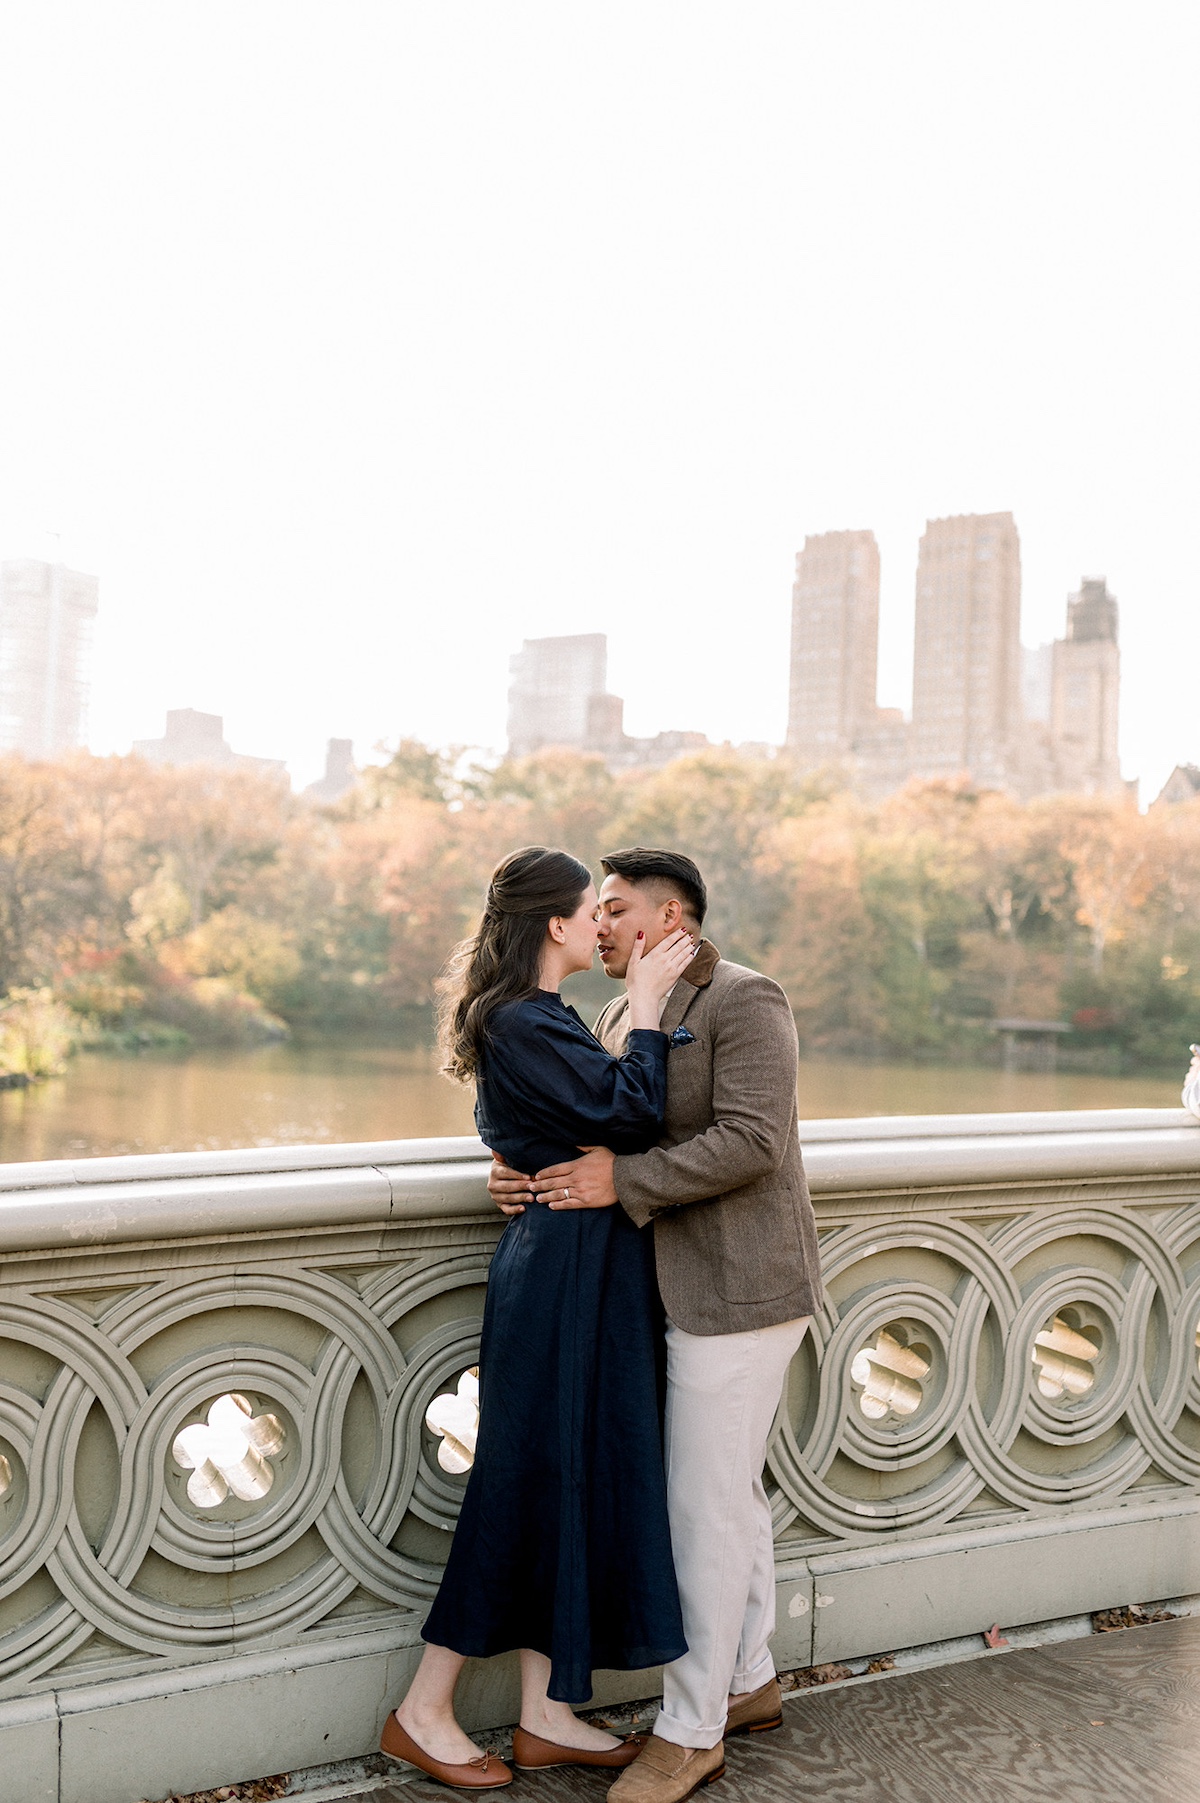 Capturing the essence of elegance at Bow Bridge, a luxury brand photographer frames Symphony Estrada's rebrand in the heart of Central Park.